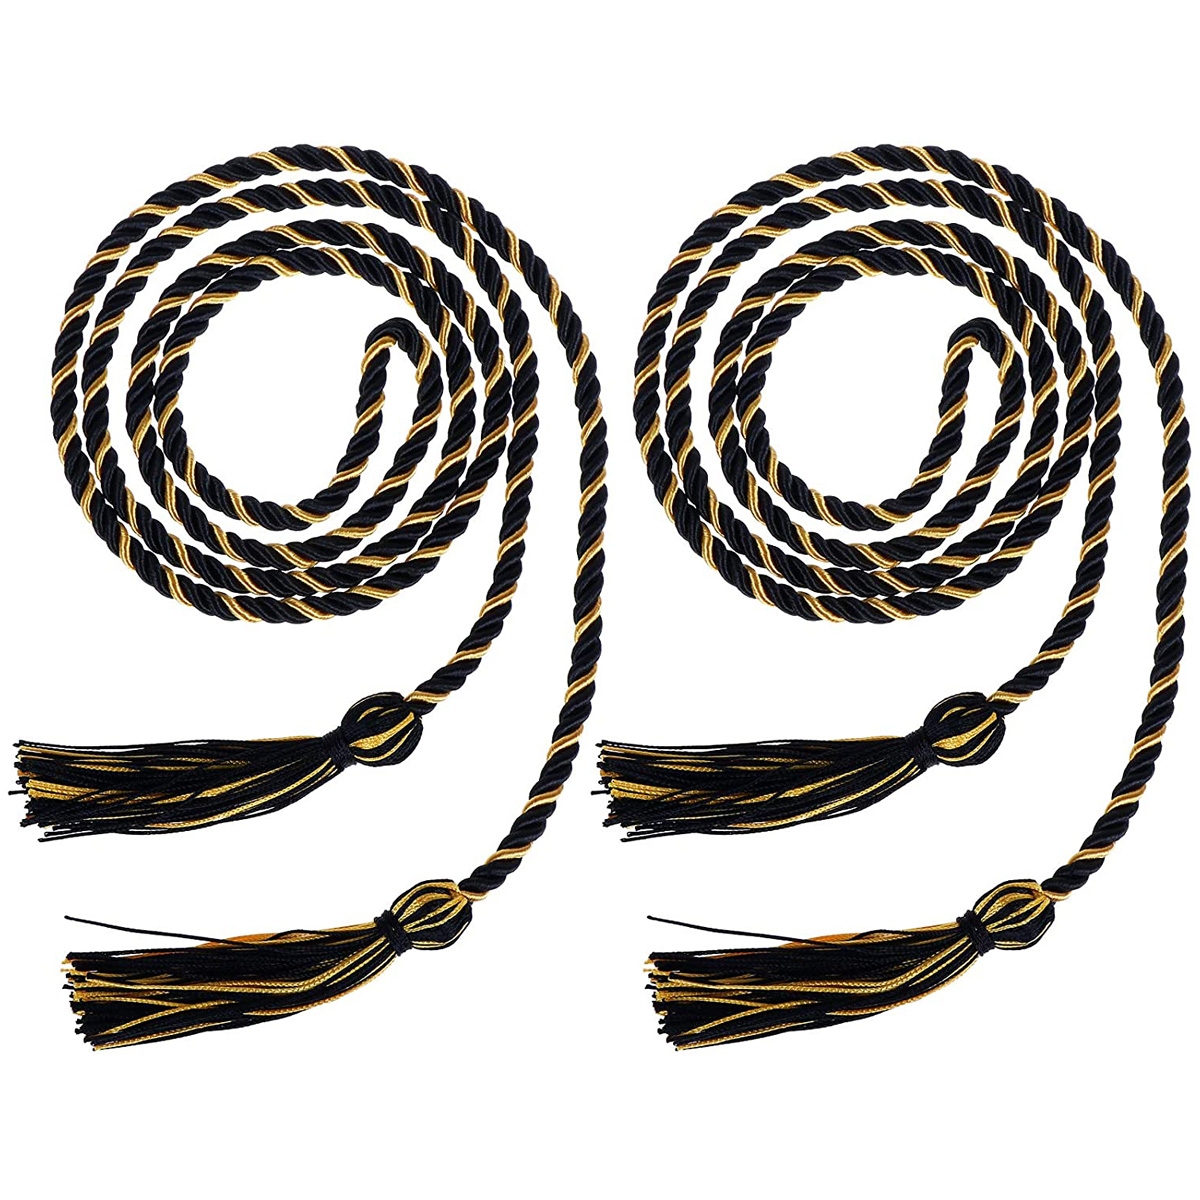 Decoration Braided Cords with Tassels for High School College Graduation black and gold